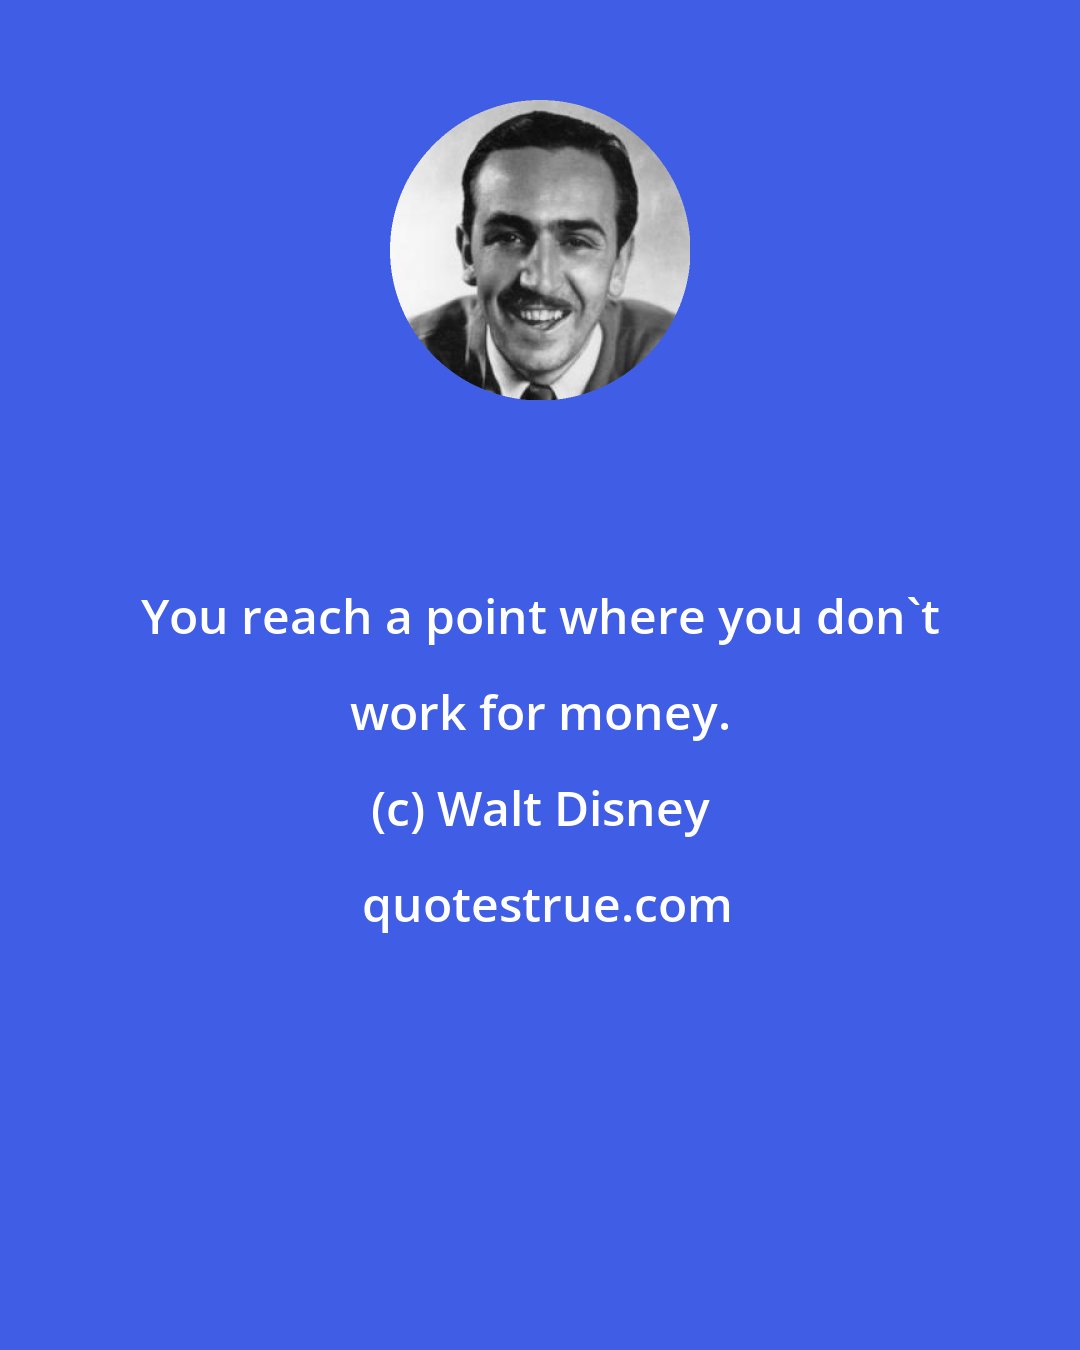 Walt Disney: You reach a point where you don't work for money.